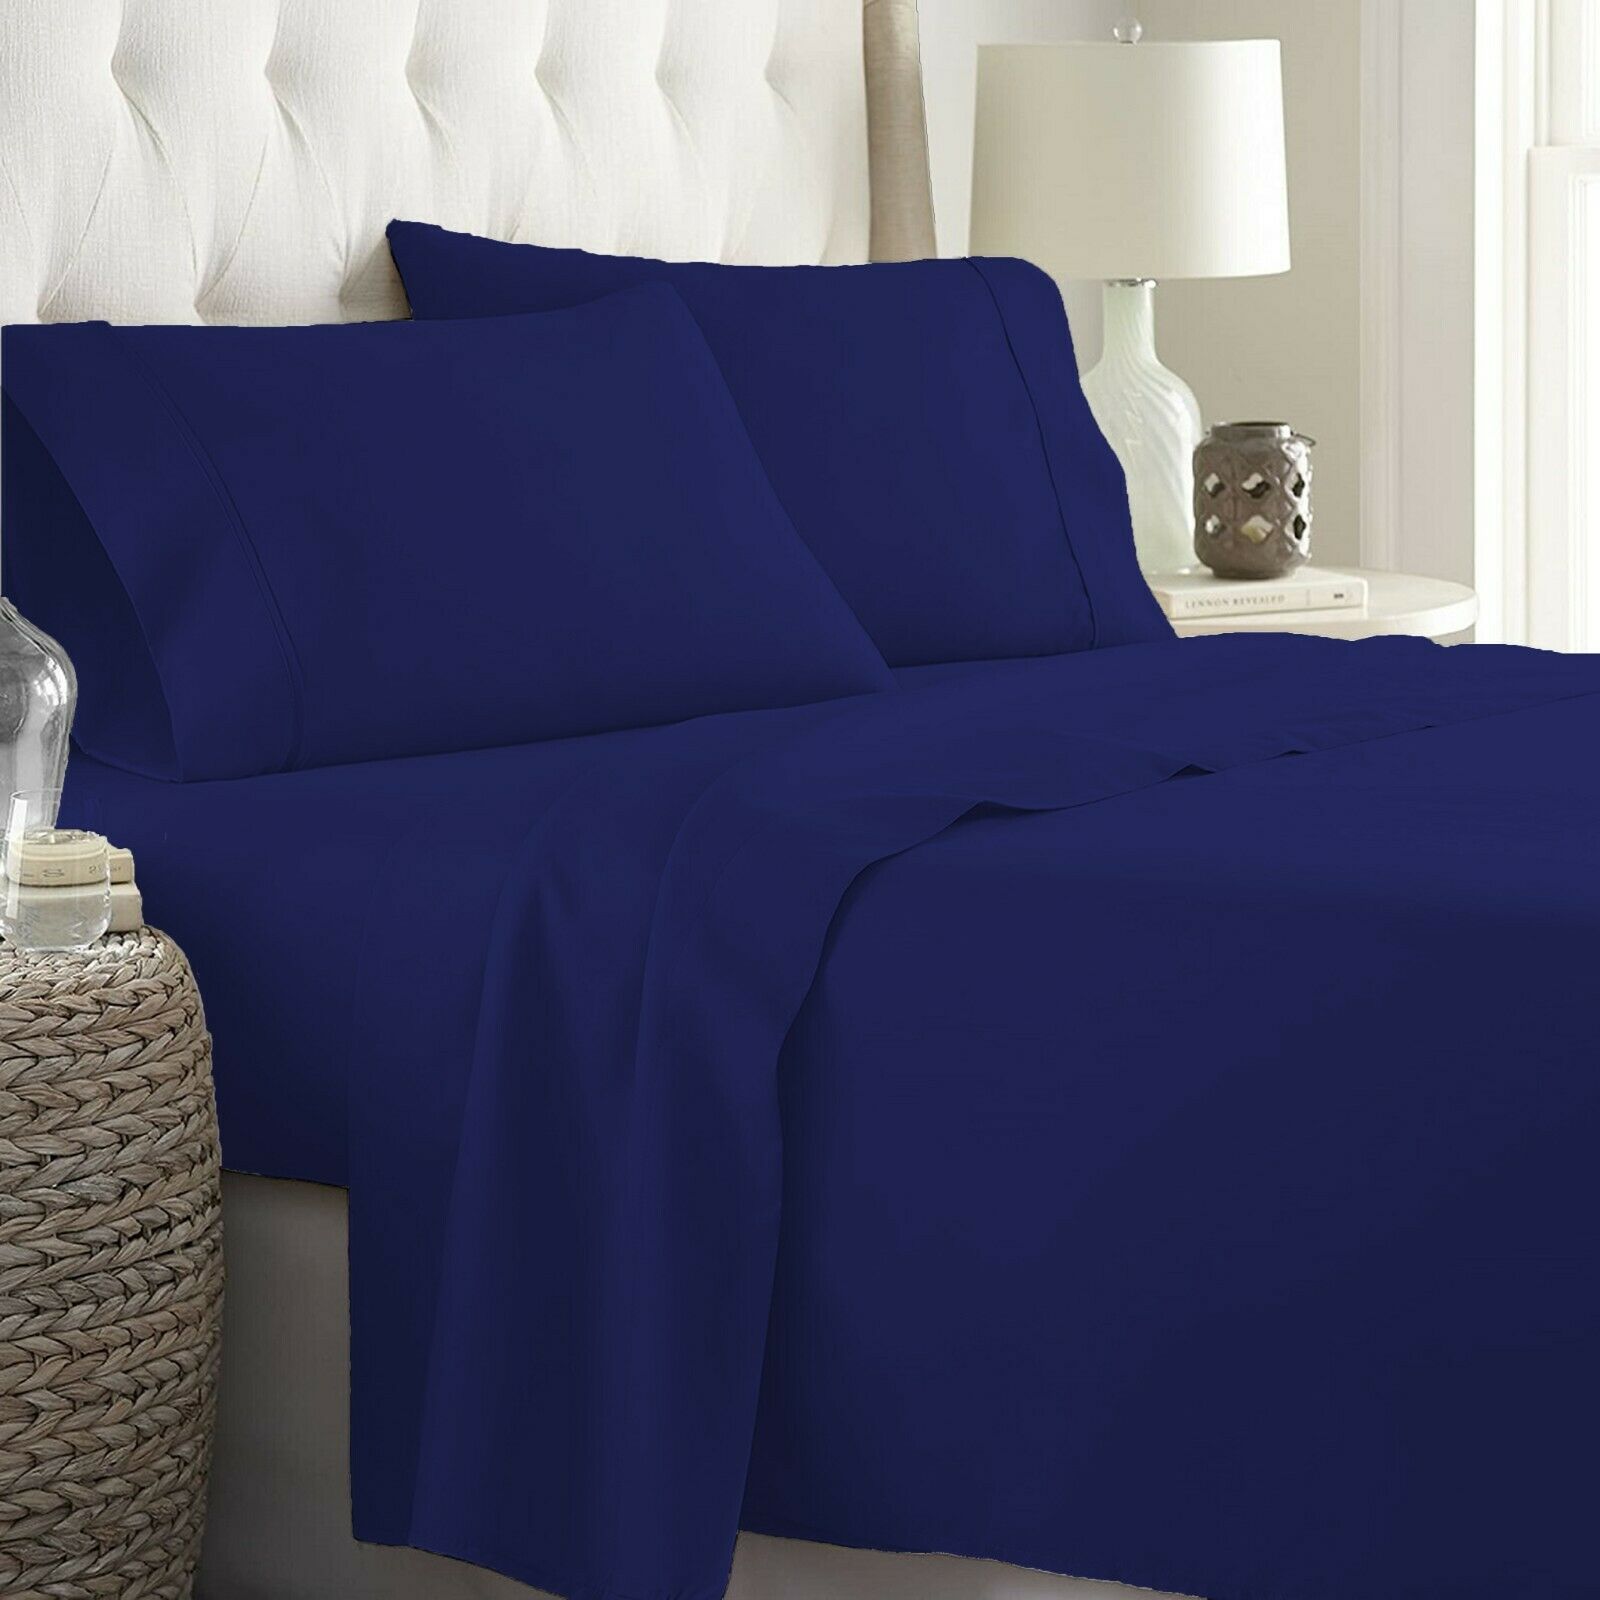 Buy Queen Size Flat Sheet Navy Blue Egyptian Cotton 1000 Thread Count at- Egyptianhomelinens.com